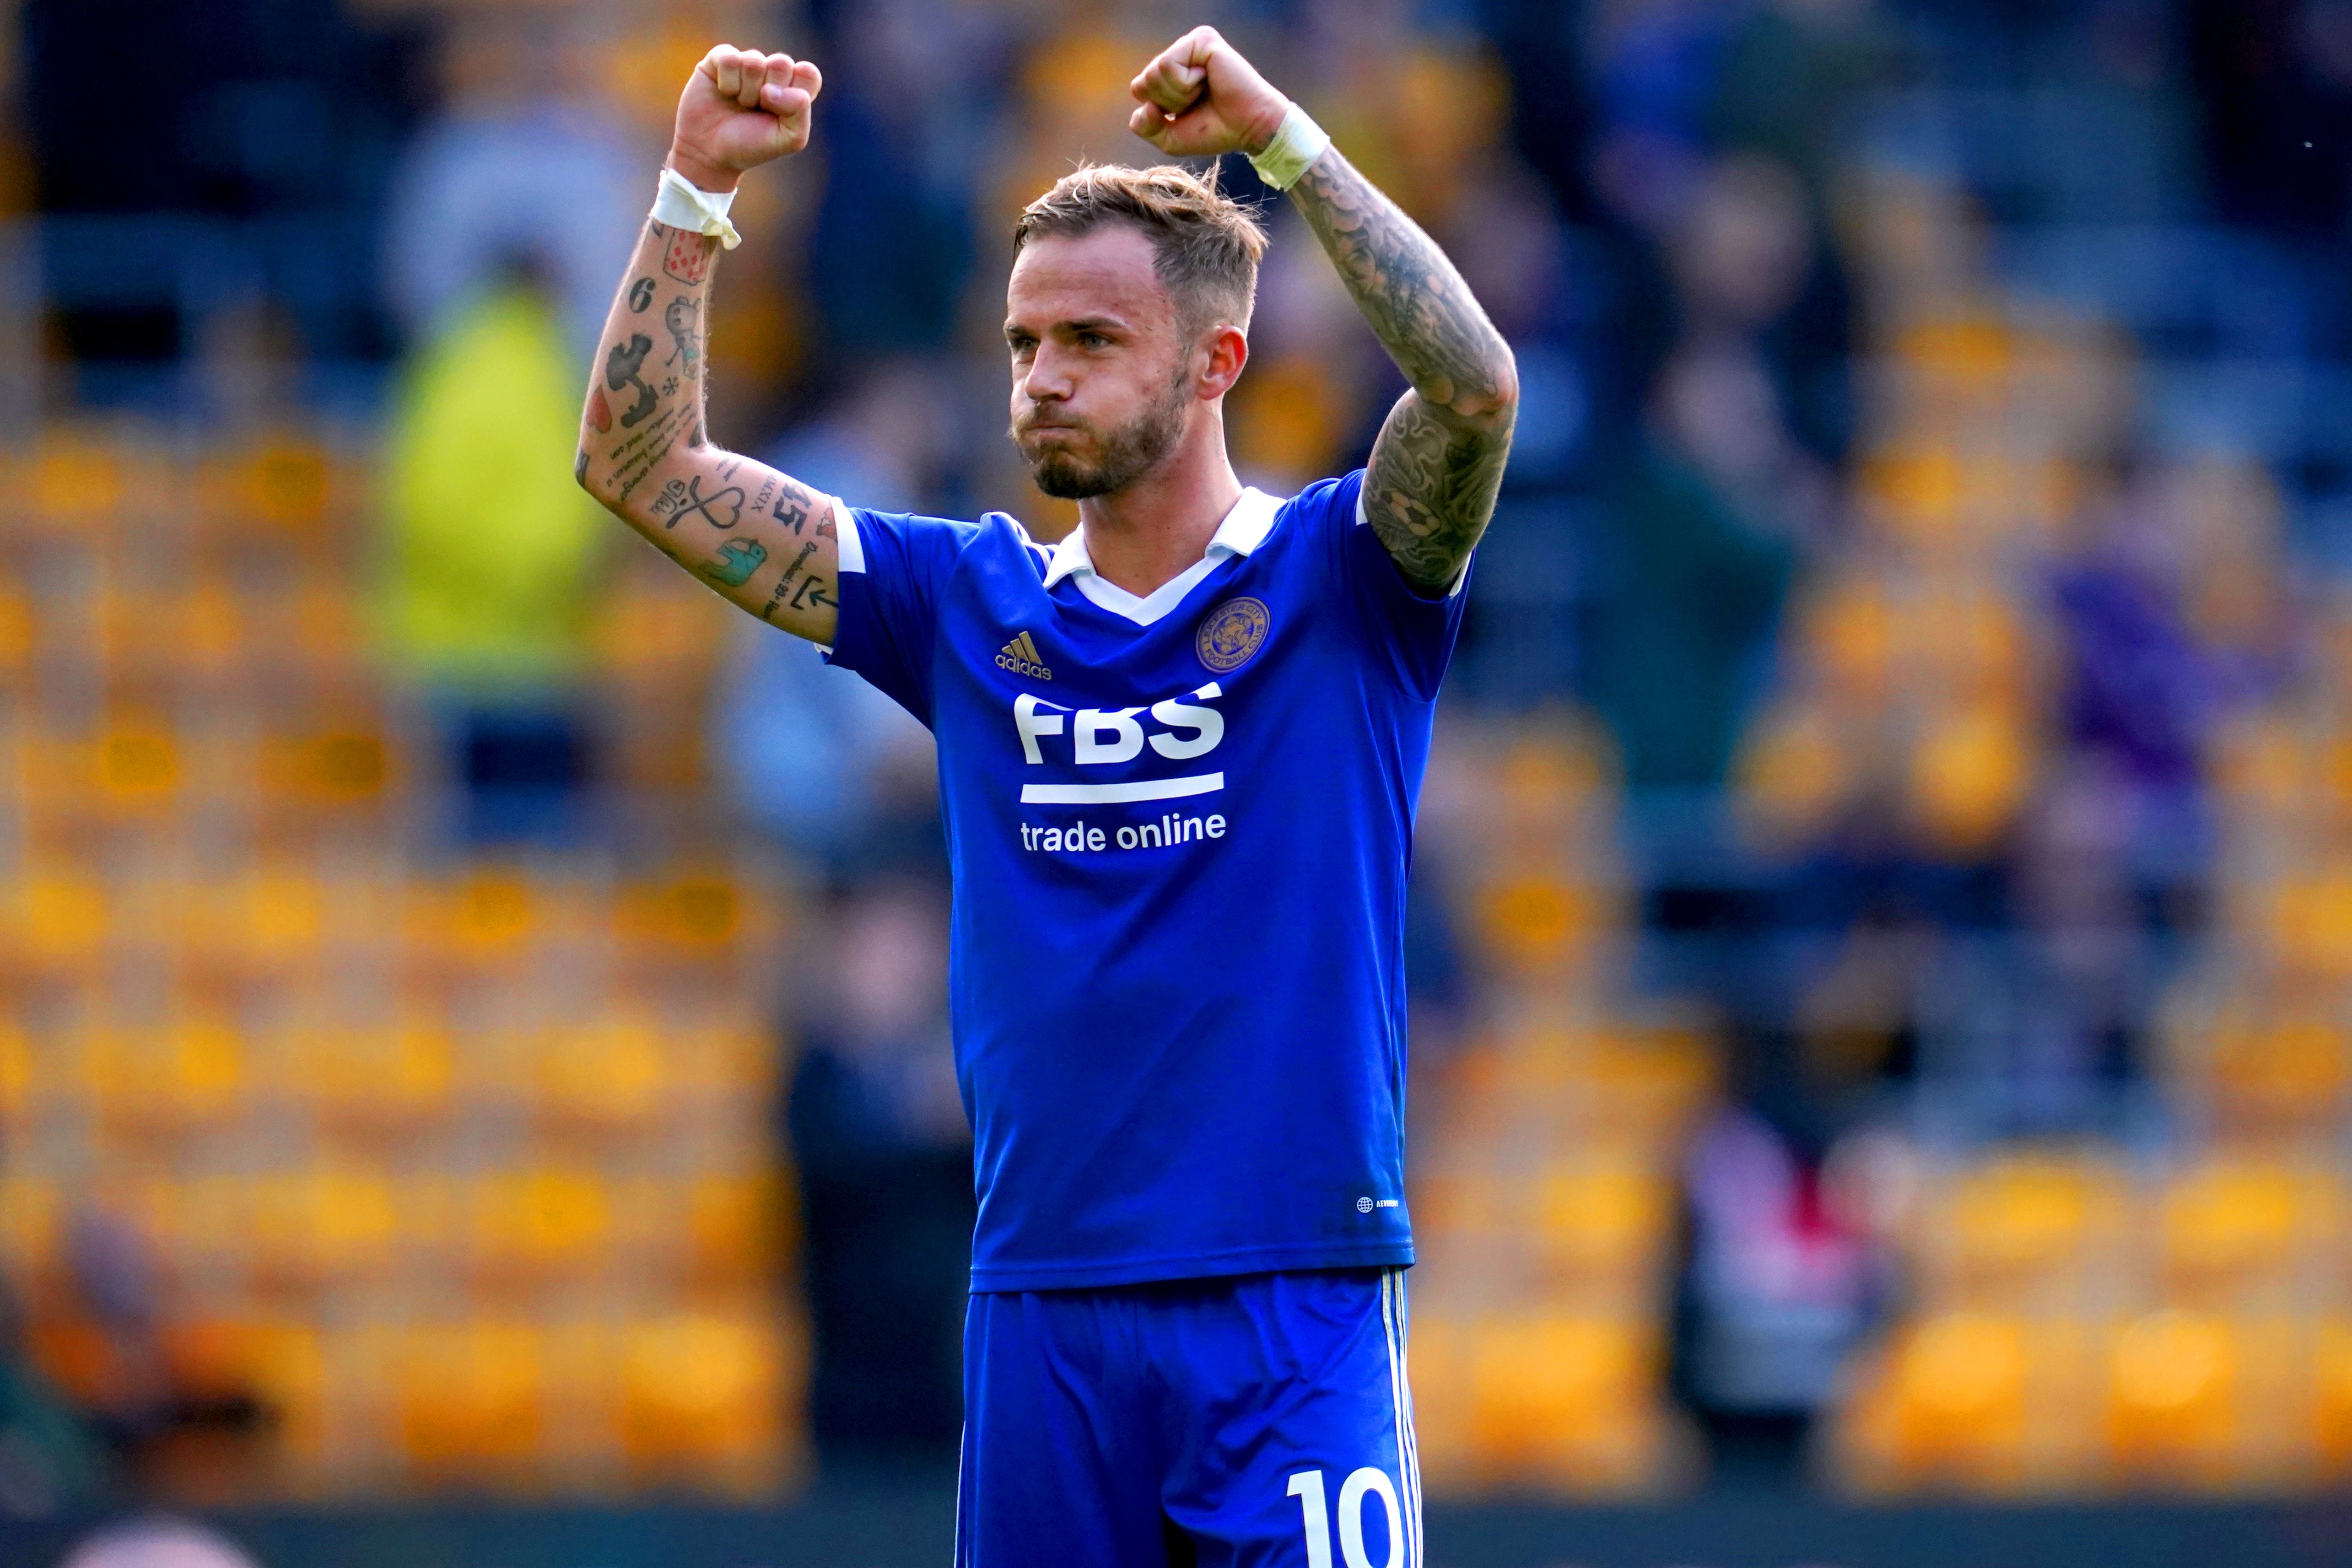 Leicester City’s James Maddison celebrates at the end of the Premier League match at the Molineux, Wolverhampton. Picture date: Sunday October 23, 2022.